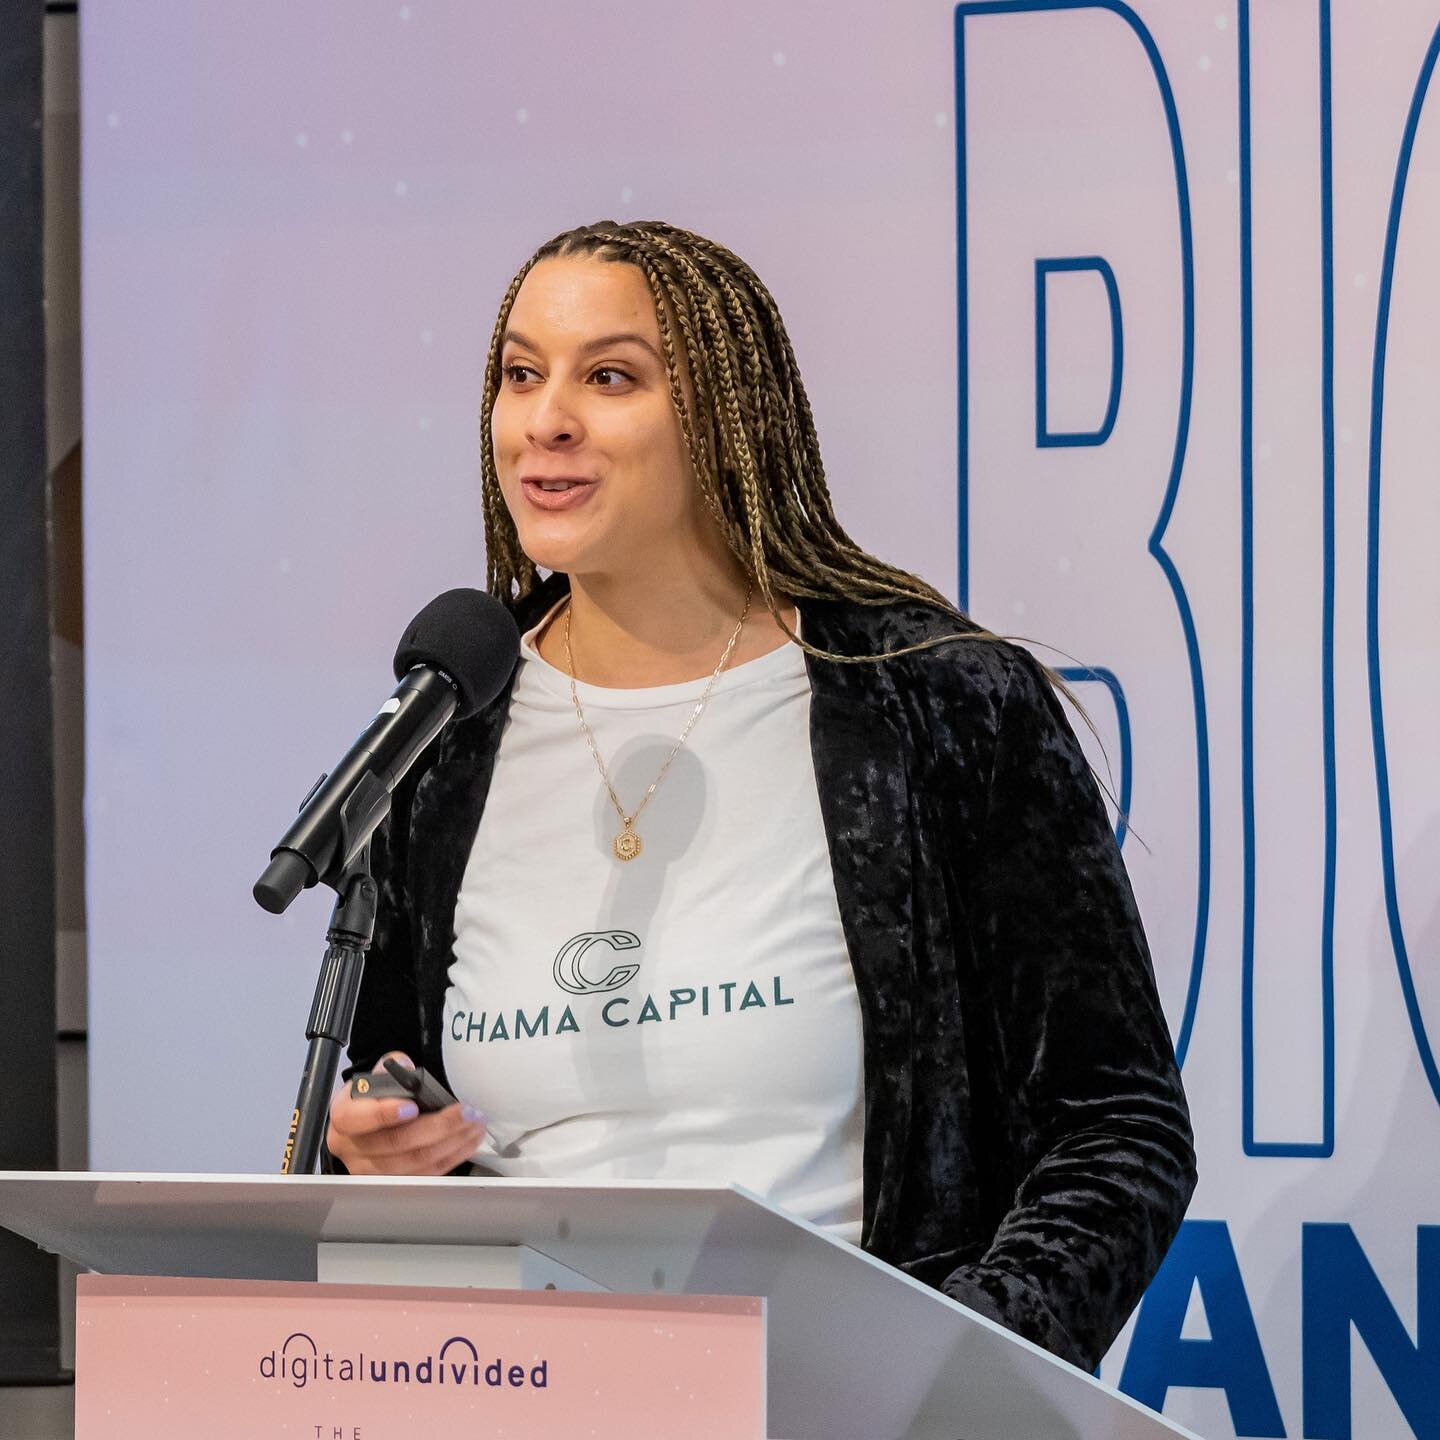 Thank you @digitalundivided for the feature!

Repost @digitalundivided 

If you&rsquo;re still soaking up all the positivity and togetherness brought on by Women&rsquo;s History Month, get to know a few more amazing founders from our most recent digi